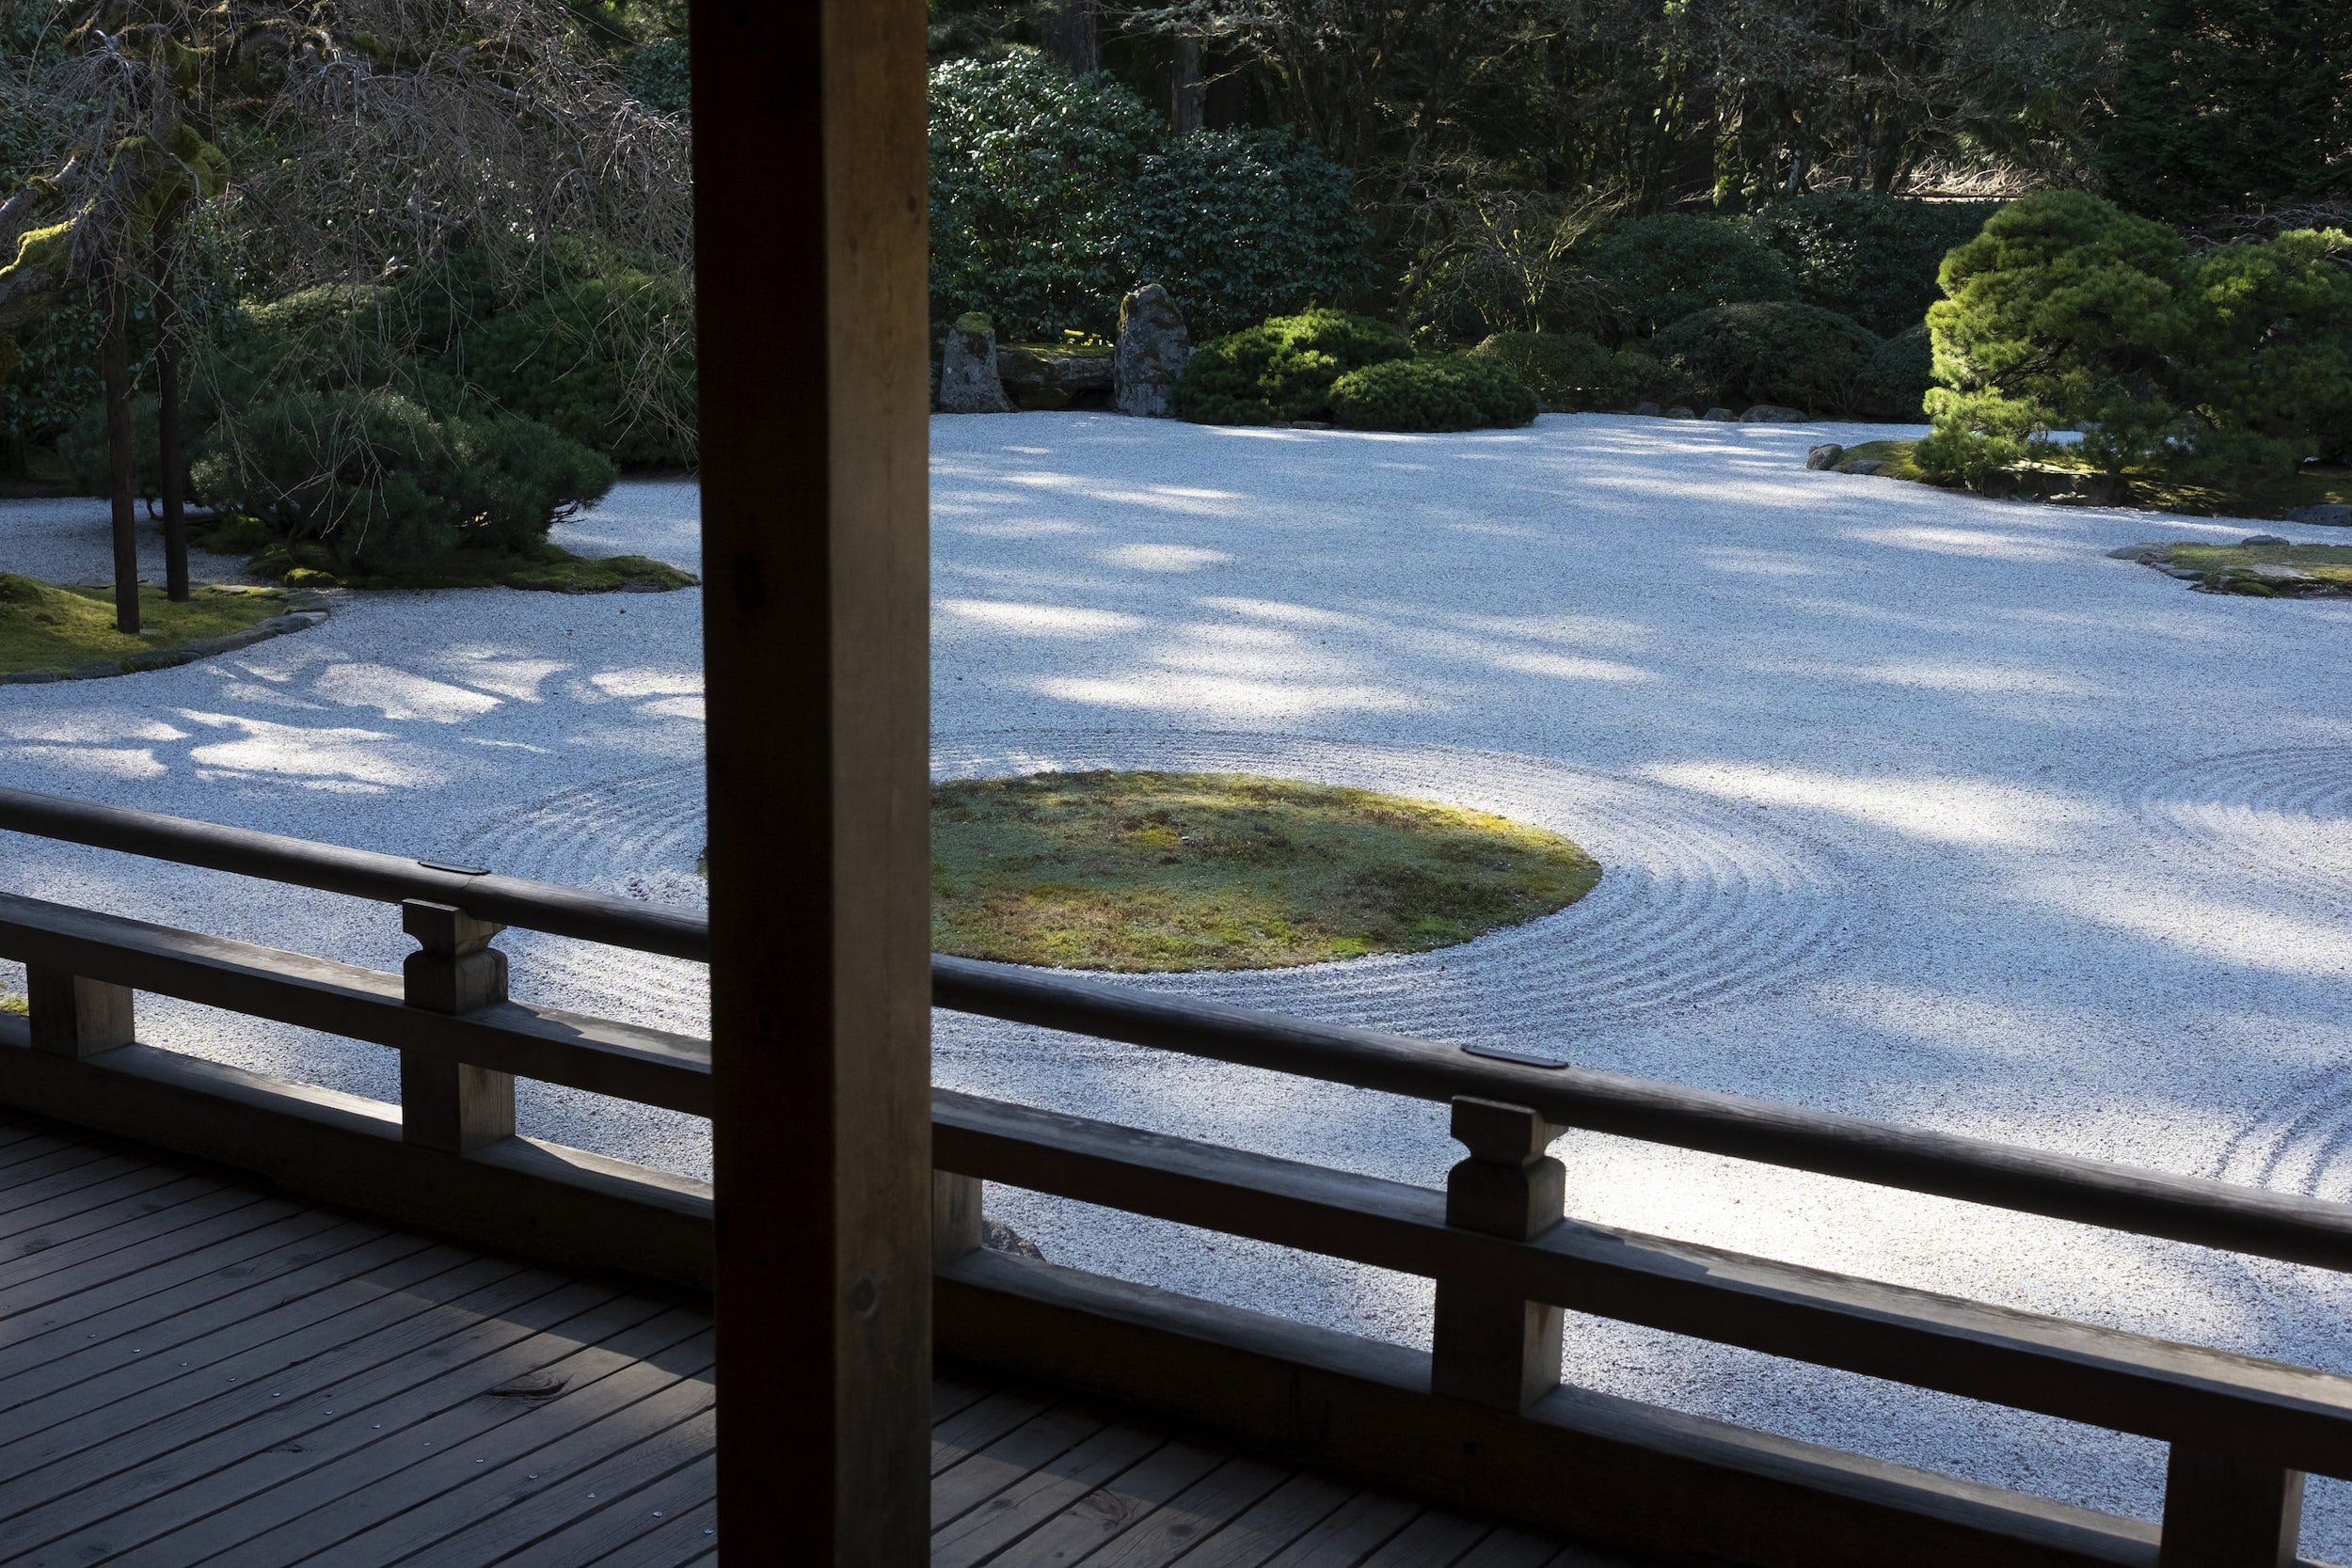 How to get Started with a Zen Garden